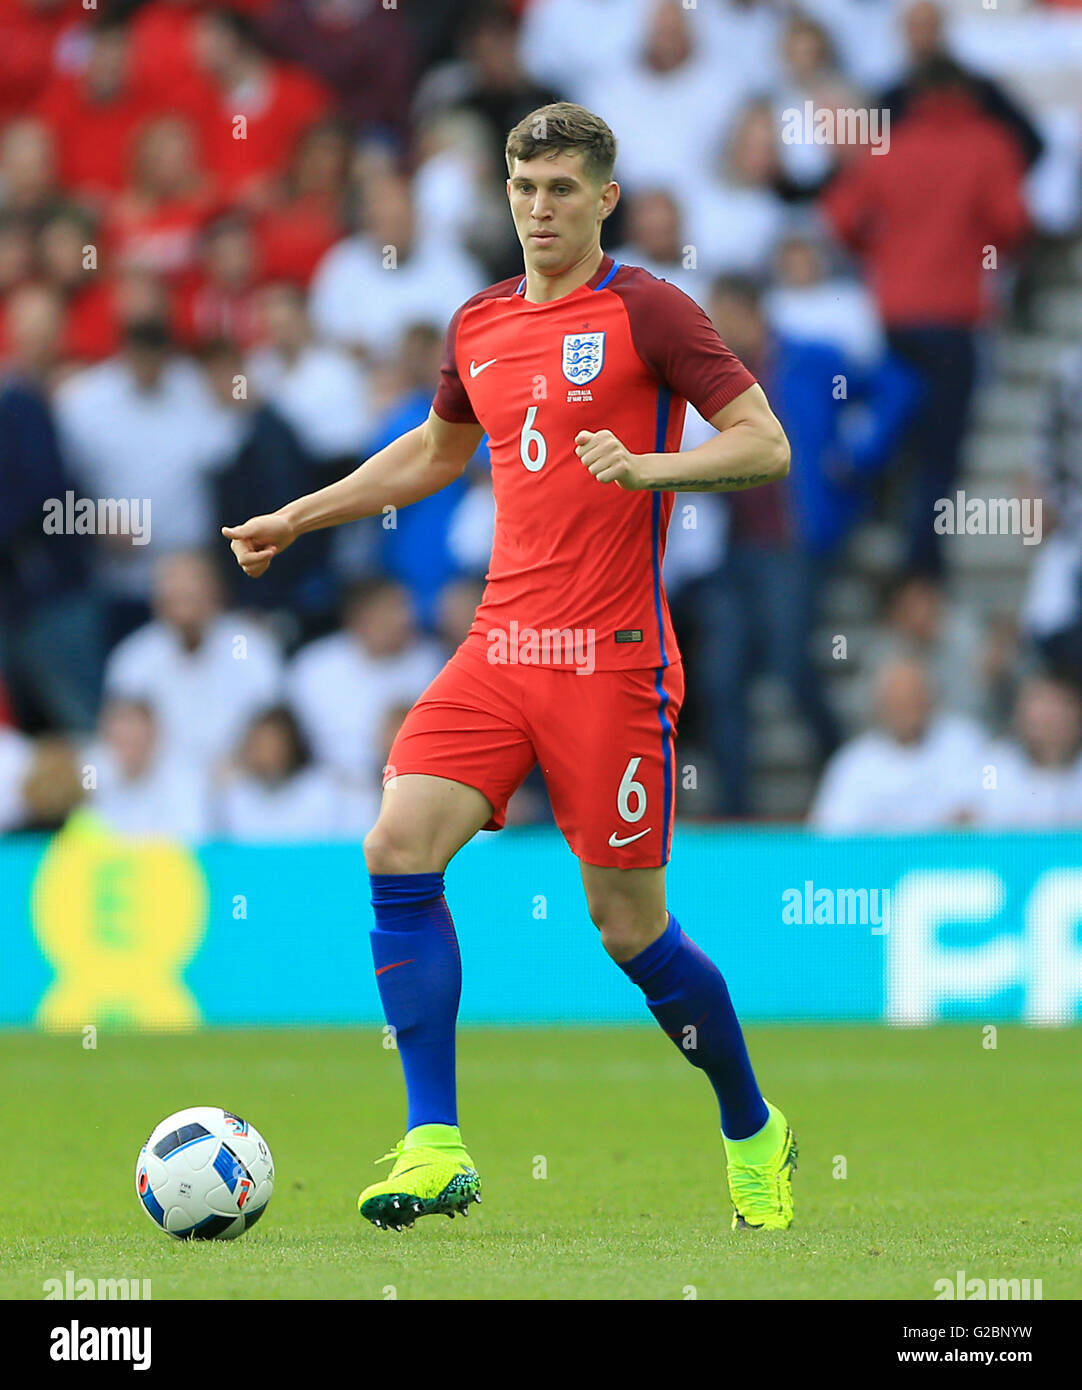 John Stones during the International Friendly at the Stadium of Light, Sunderland. PRESS ASSOCIATION Photo. Picture date: Friday May 27, 2016. See PA story SOCCER England. Photo credit should read: Tim Goode/PA Wire. Stock Photo